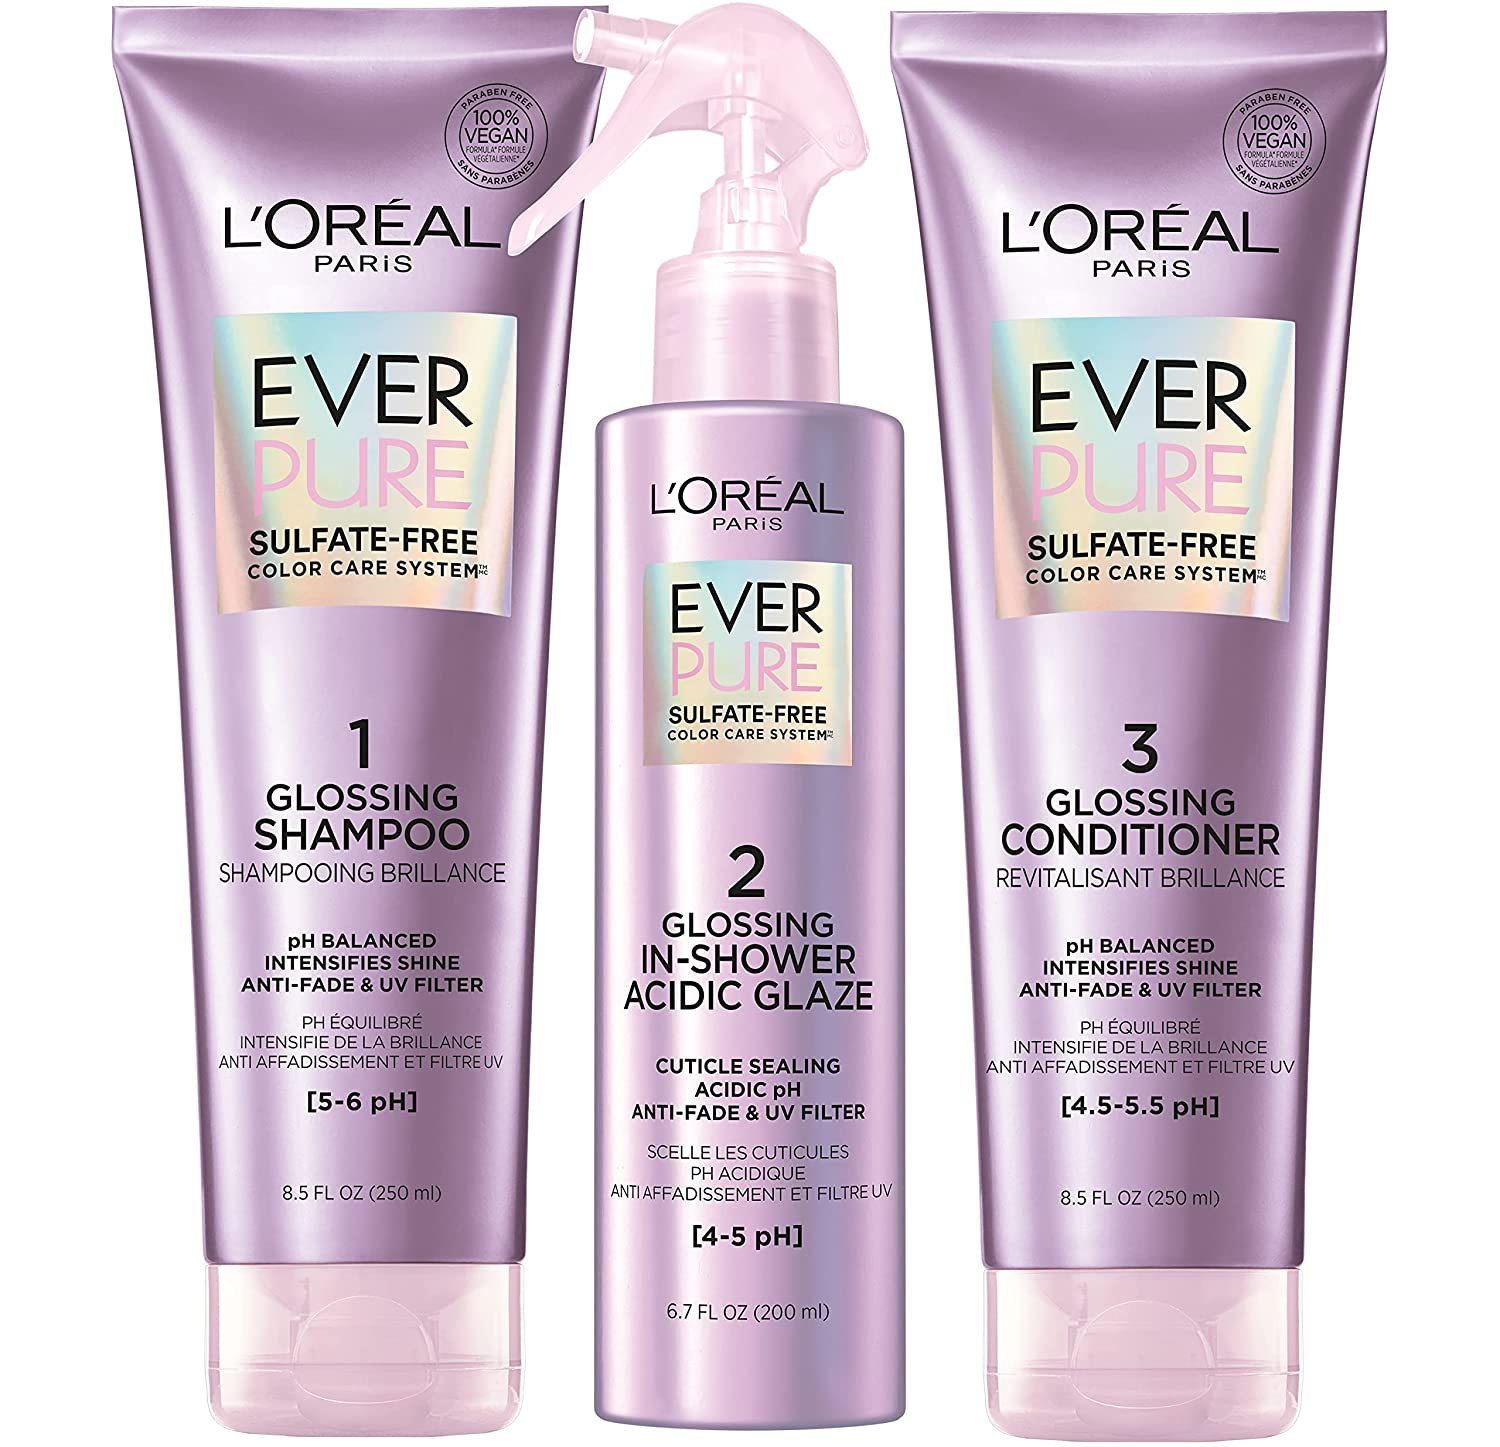 L'Oreal Paris EverPure Sulfate Free Glossing Shampoo, Conditioner, and Treatment Kit